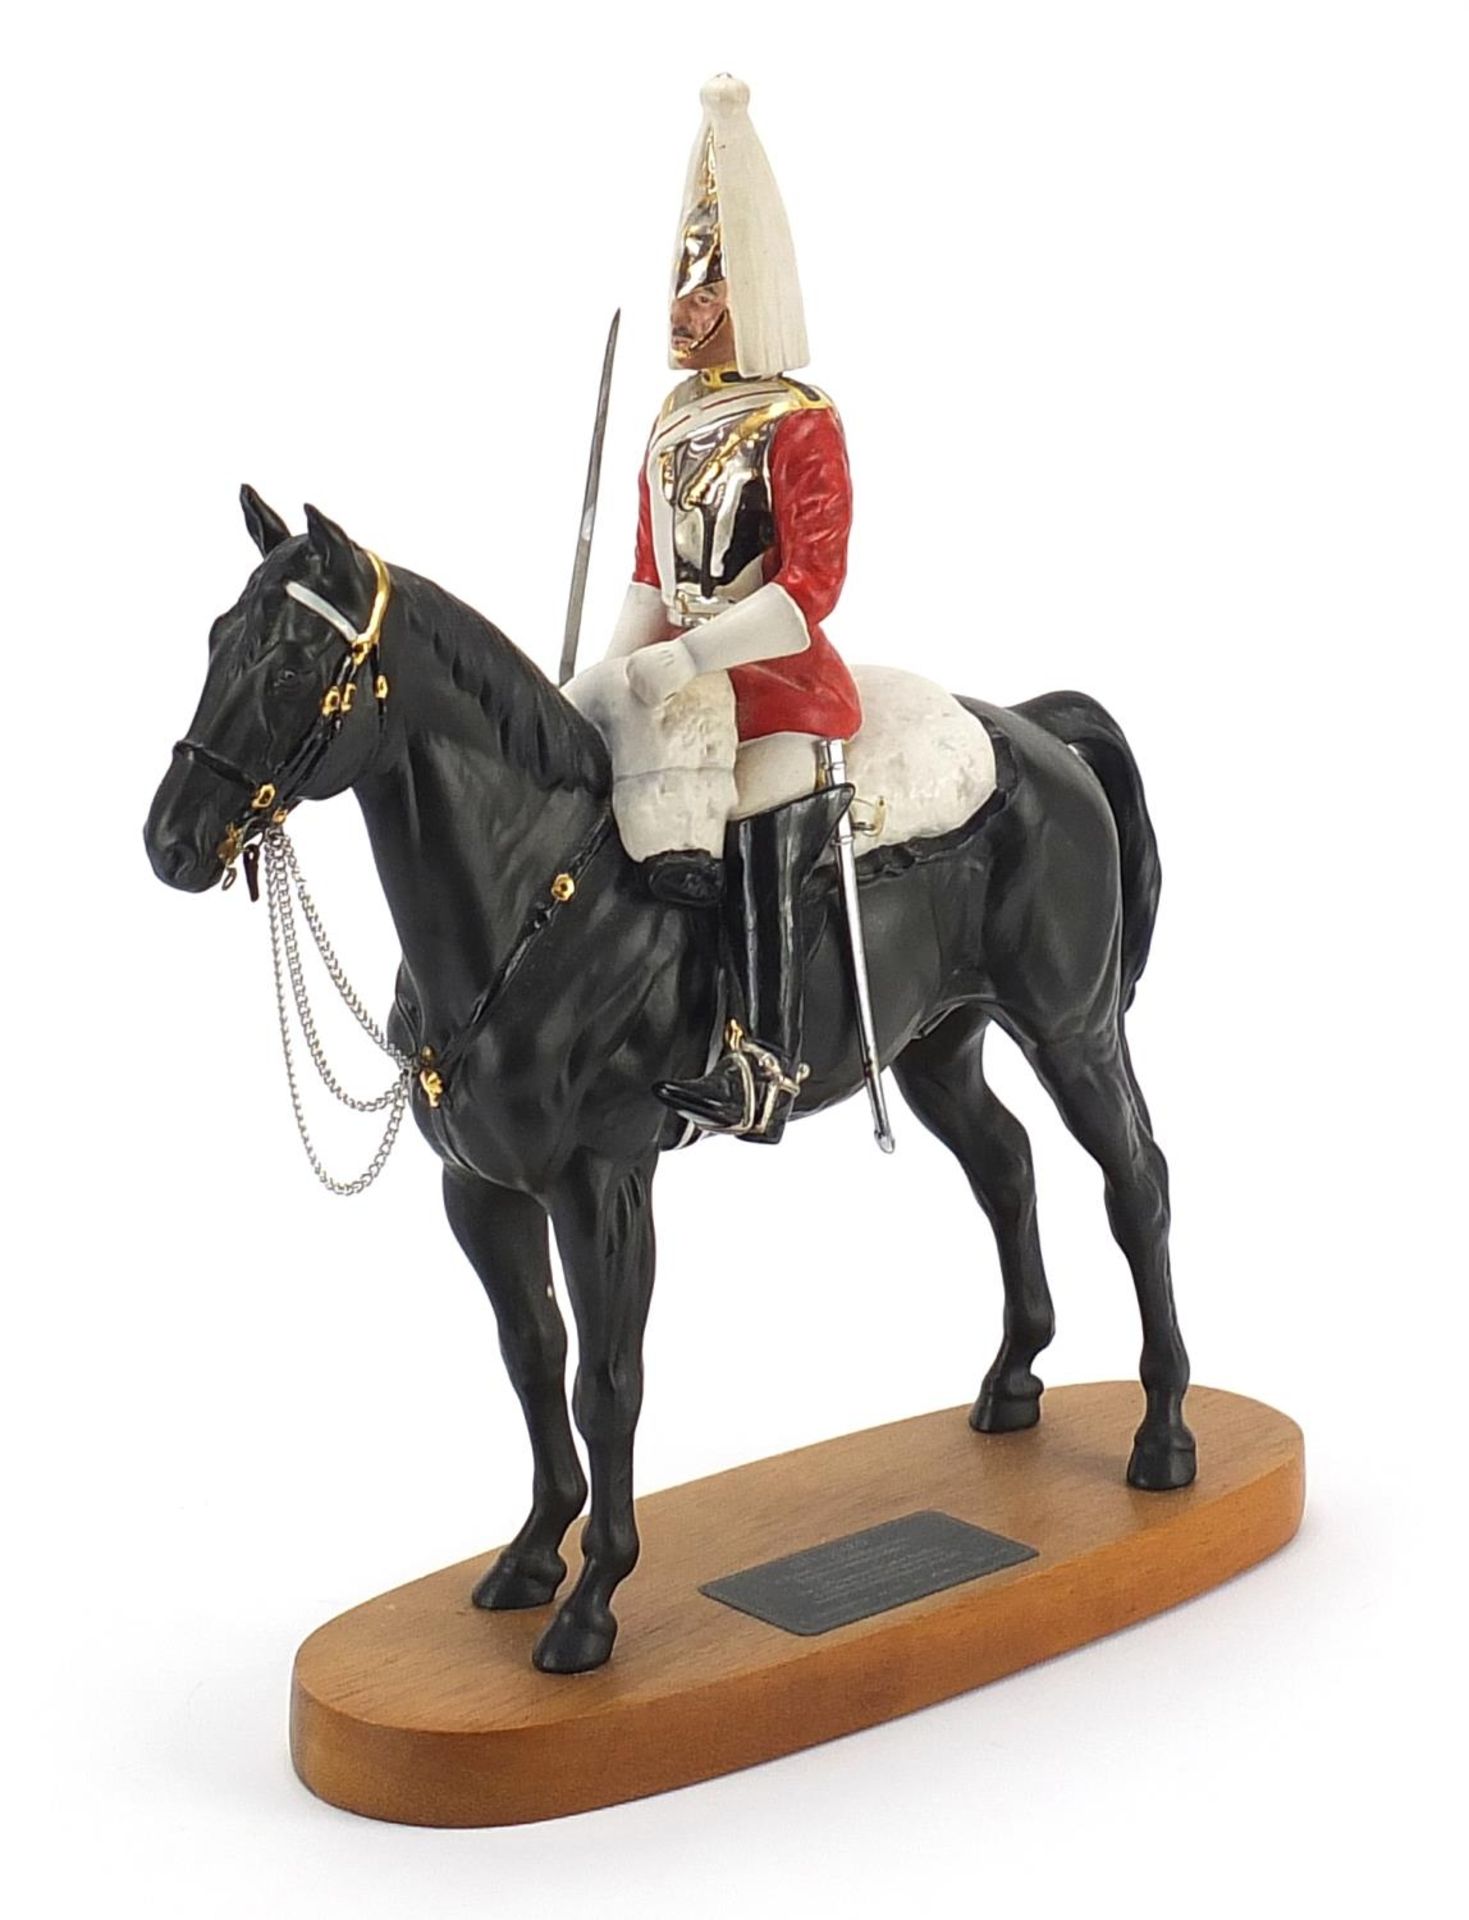 Beswick Connoisseur model of a Lifeguard on horseback raised on a wooden plinth base, 29cm in length